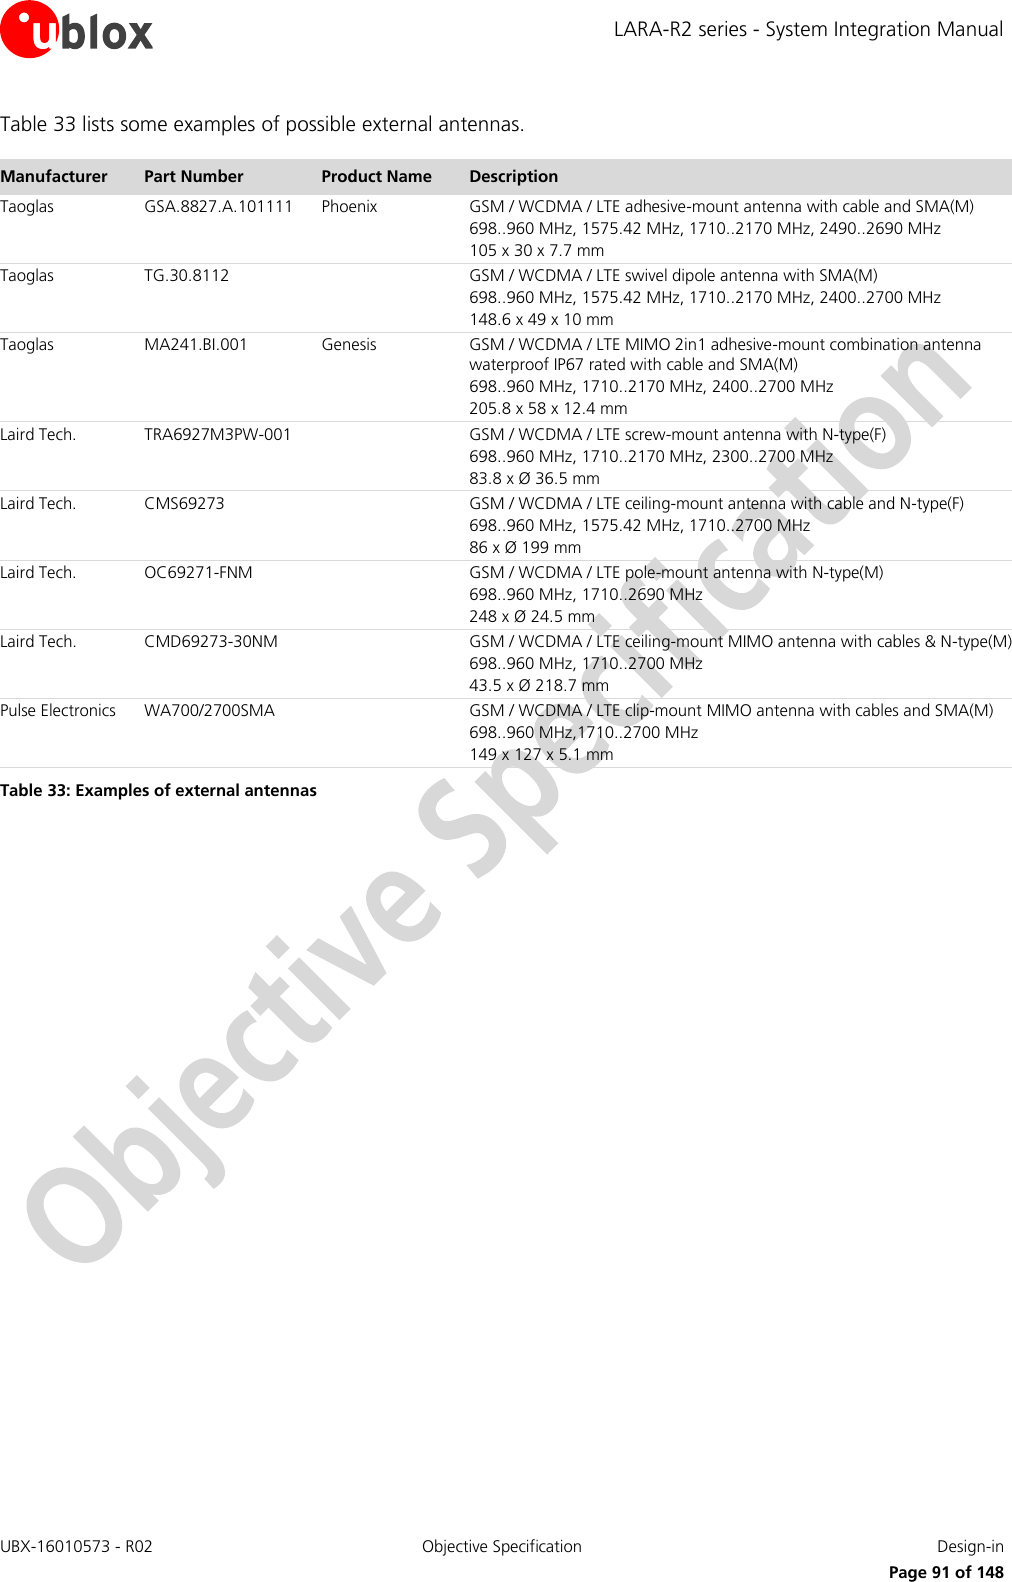 LARA-R2 series - System Integration Manual UBX-16010573 - R02  Objective Specification  Design-in     Page 91 of 148 Table 33 lists some examples of possible external antennas.  Manufacturer Part Number Product Name Description Taoglas GSA.8827.A.101111  Phoenix GSM / WCDMA / LTE adhesive-mount antenna with cable and SMA(M)  698..960 MHz, 1575.42 MHz, 1710..2170 MHz, 2490..2690 MHz 105 x 30 x 7.7 mm Taoglas TG.30.8112  GSM / WCDMA / LTE swivel dipole antenna with SMA(M)  698..960 MHz, 1575.42 MHz, 1710..2170 MHz, 2400..2700 MHz  148.6 x 49 x 10 mm Taoglas MA241.BI.001 Genesis GSM / WCDMA / LTE MIMO 2in1 adhesive-mount combination antenna waterproof IP67 rated with cable and SMA(M) 698..960 MHz, 1710..2170 MHz, 2400..2700 MHz  205.8 x 58 x 12.4 mm Laird Tech. TRA6927M3PW-001  GSM / WCDMA / LTE screw-mount antenna with N-type(F)  698..960 MHz, 1710..2170 MHz, 2300..2700 MHz  83.8 x Ø 36.5 mm Laird Tech. CMS69273  GSM / WCDMA / LTE ceiling-mount antenna with cable and N-type(F)  698..960 MHz, 1575.42 MHz, 1710..2700 MHz  86 x Ø 199 mm Laird Tech. OC69271-FNM  GSM / WCDMA / LTE pole-mount antenna with N-type(M)  698..960 MHz, 1710..2690 MHz 248 x Ø 24.5 mm Laird Tech. CMD69273-30NM  GSM / WCDMA / LTE ceiling-mount MIMO antenna with cables &amp; N-type(M)  698..960 MHz, 1710..2700 MHz  43.5 x Ø 218.7 mm Pulse Electronics WA700/2700SMA  GSM / WCDMA / LTE clip-mount MIMO antenna with cables and SMA(M)  698..960 MHz,1710..2700 MHz 149 x 127 x 5.1 mm Table 33: Examples of external antennas   